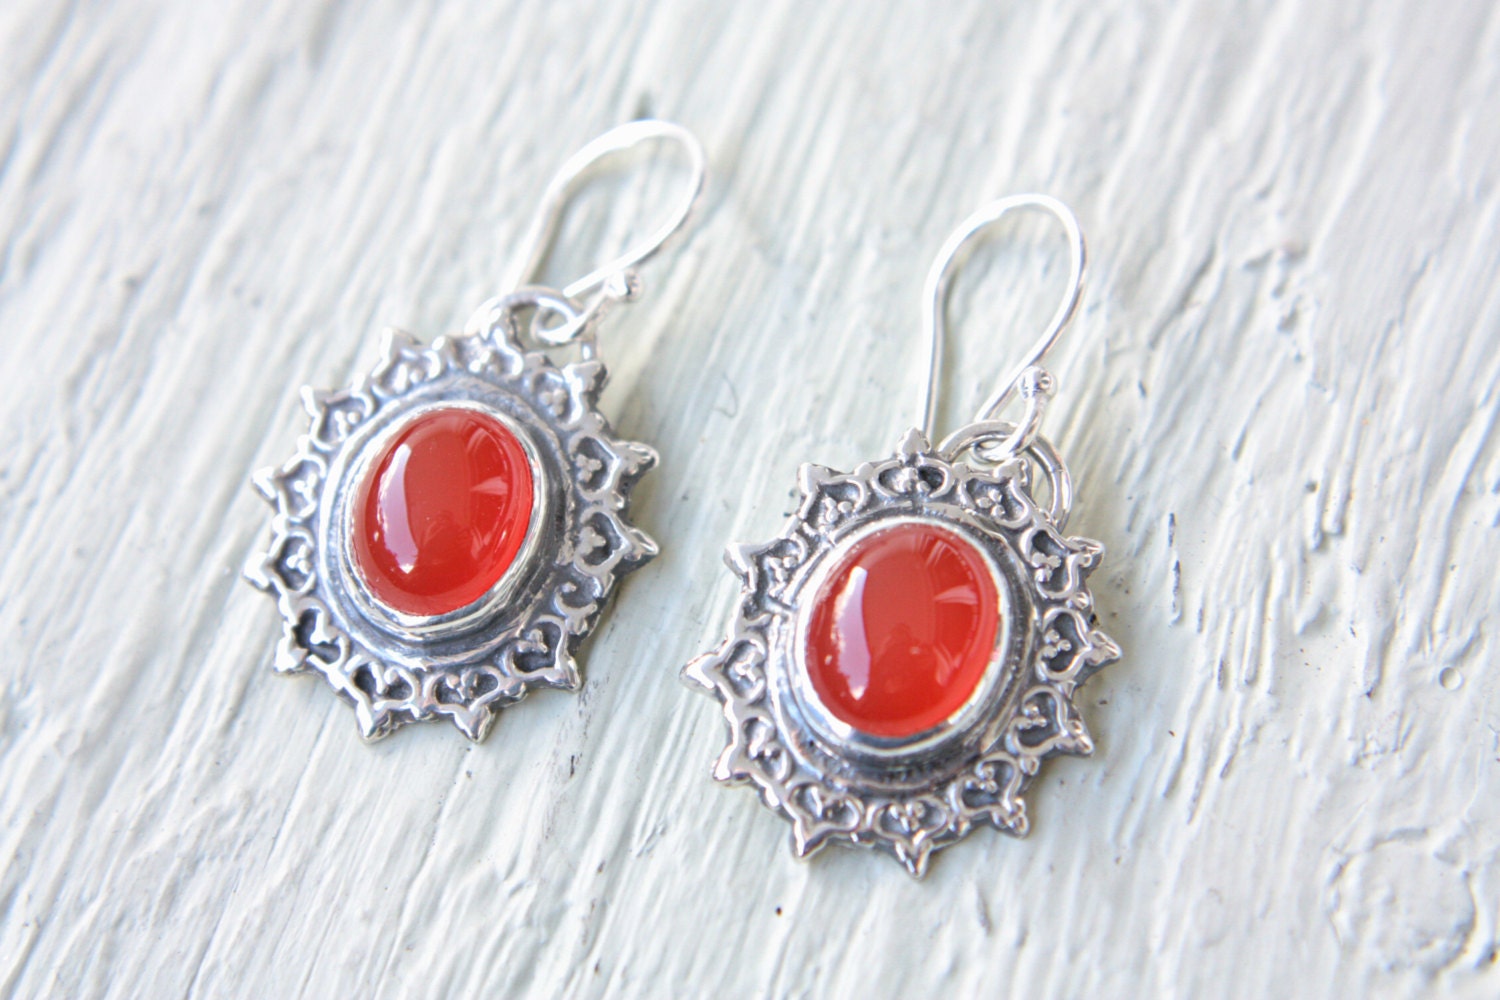 Lace Carnelian Earrings Sterling Silver Handcrafted Silversmith Metalsmithed Gemstone - ManariDesign